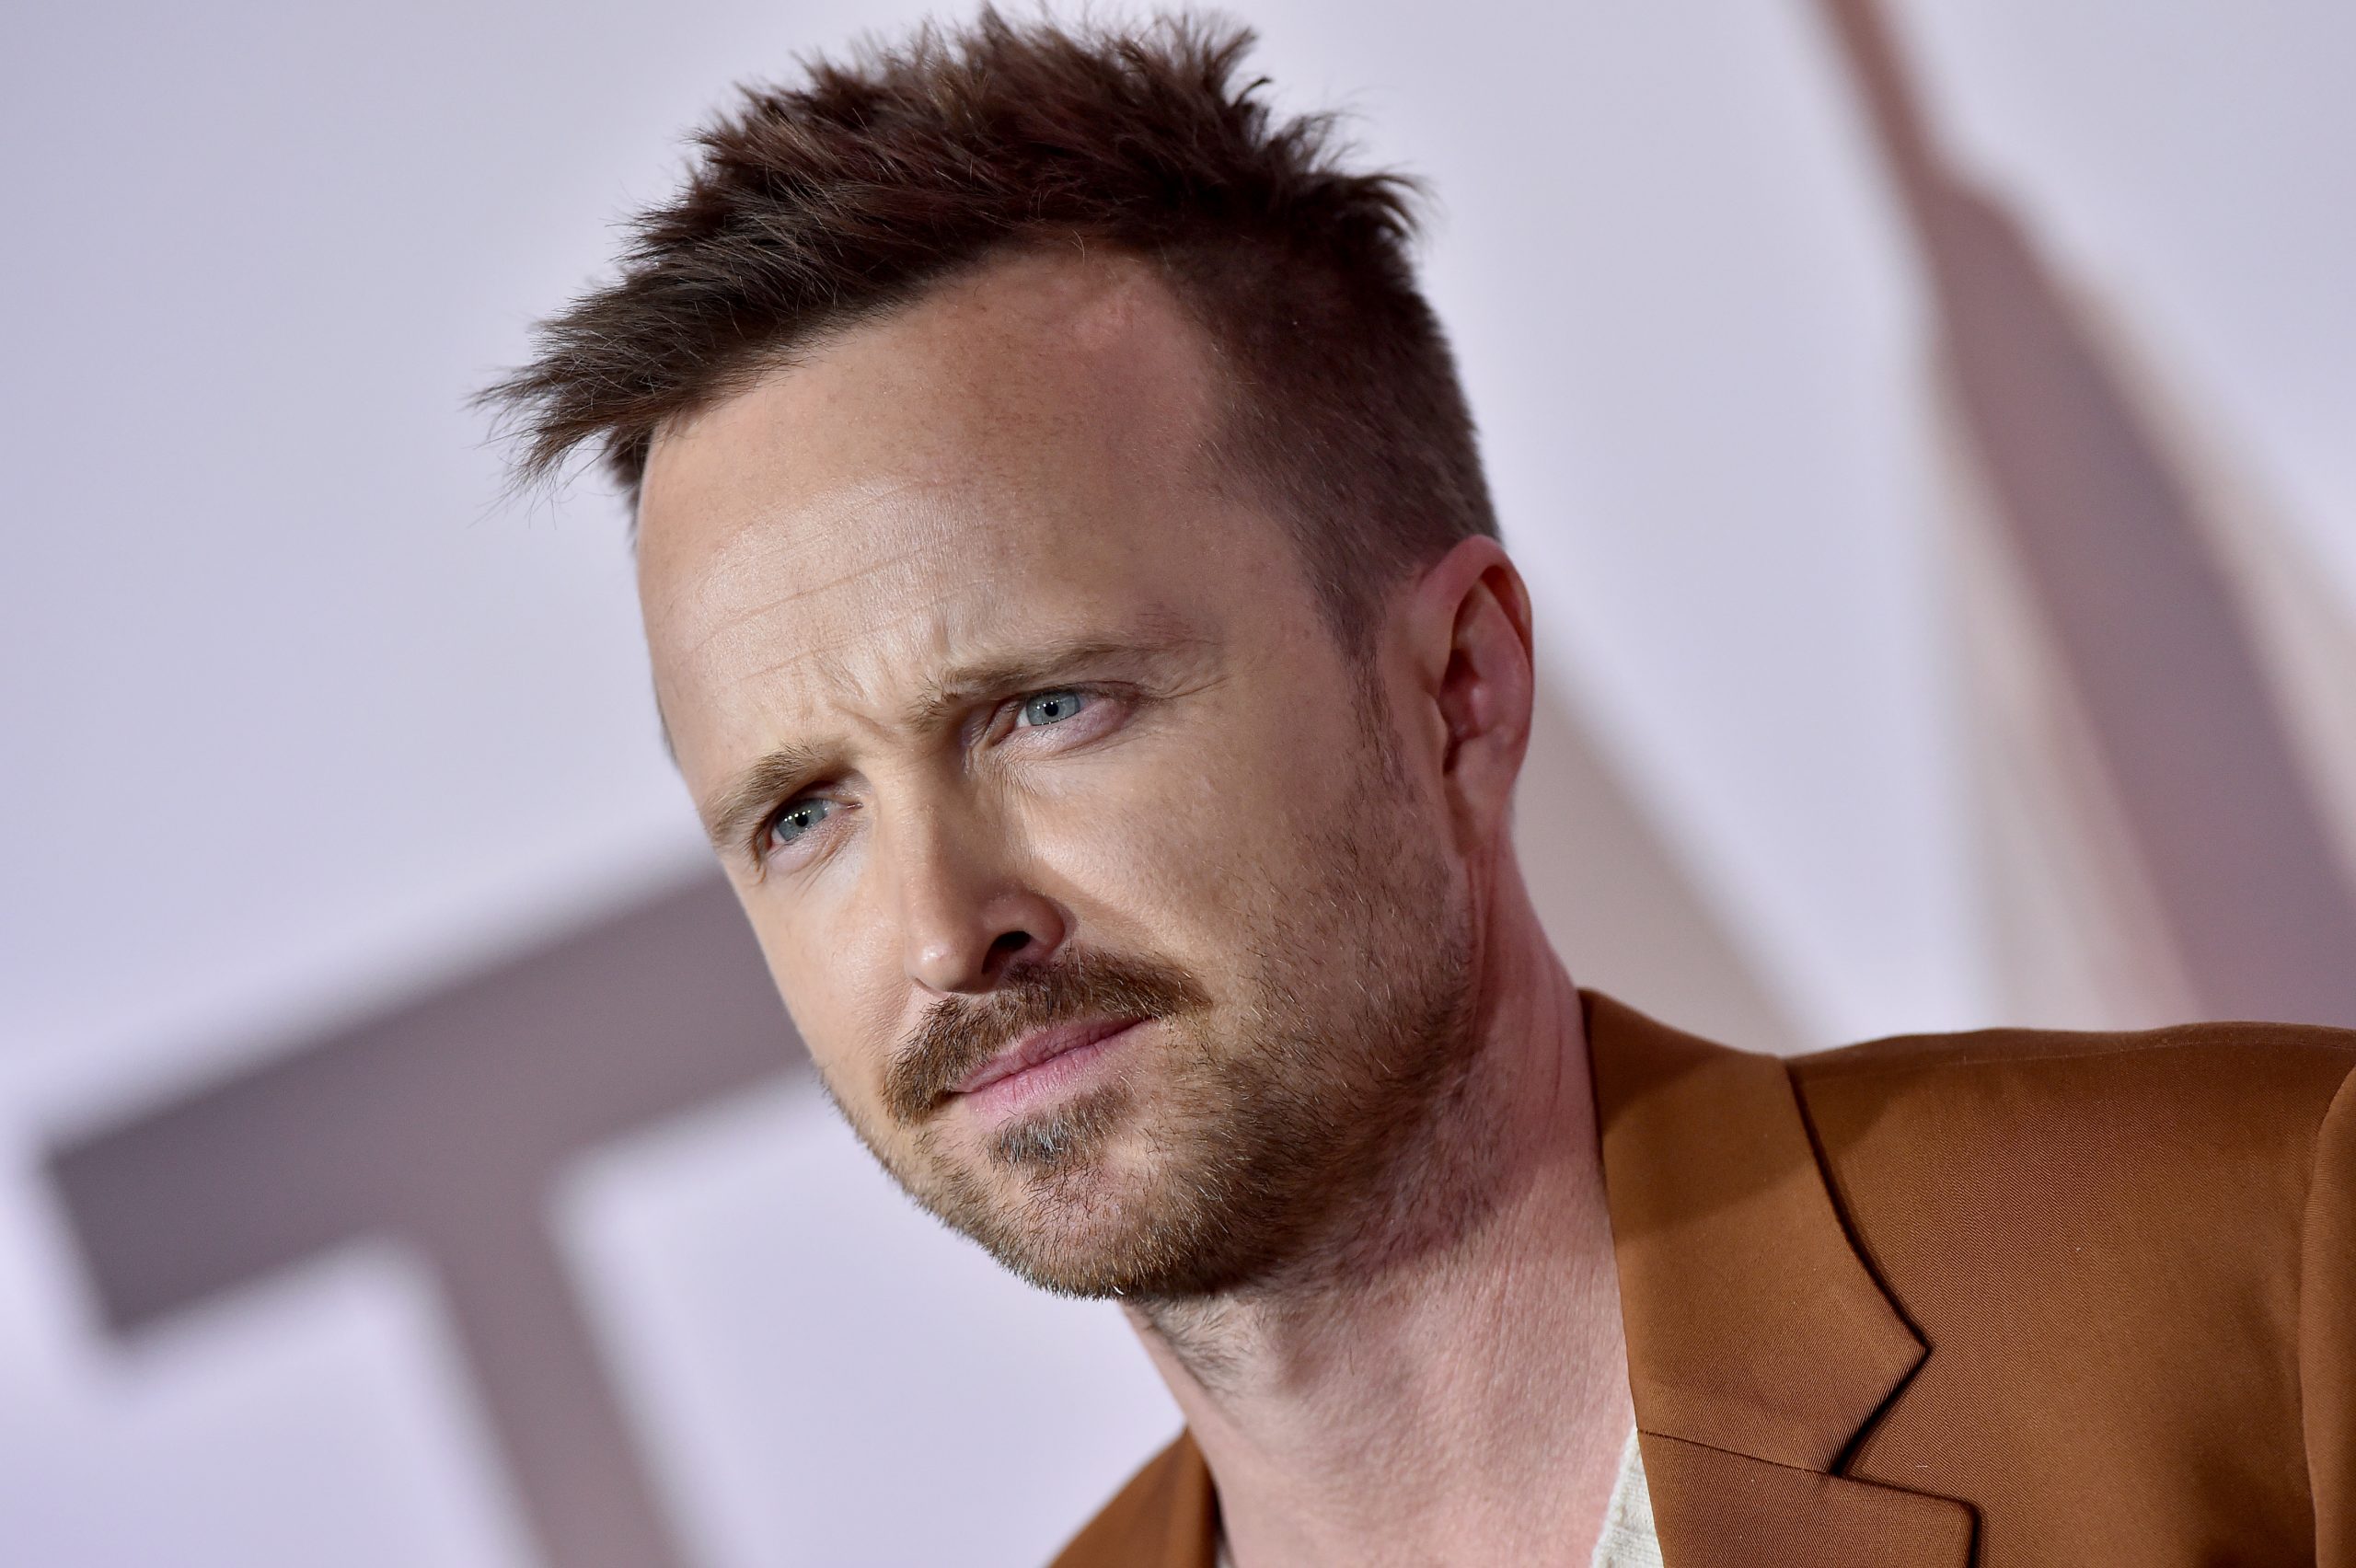 What Would ‘Breaking Bad’ Star Aaron Paul Look Like Playing ‘Spider-Man’ Villain Electro? Here’s a Peek